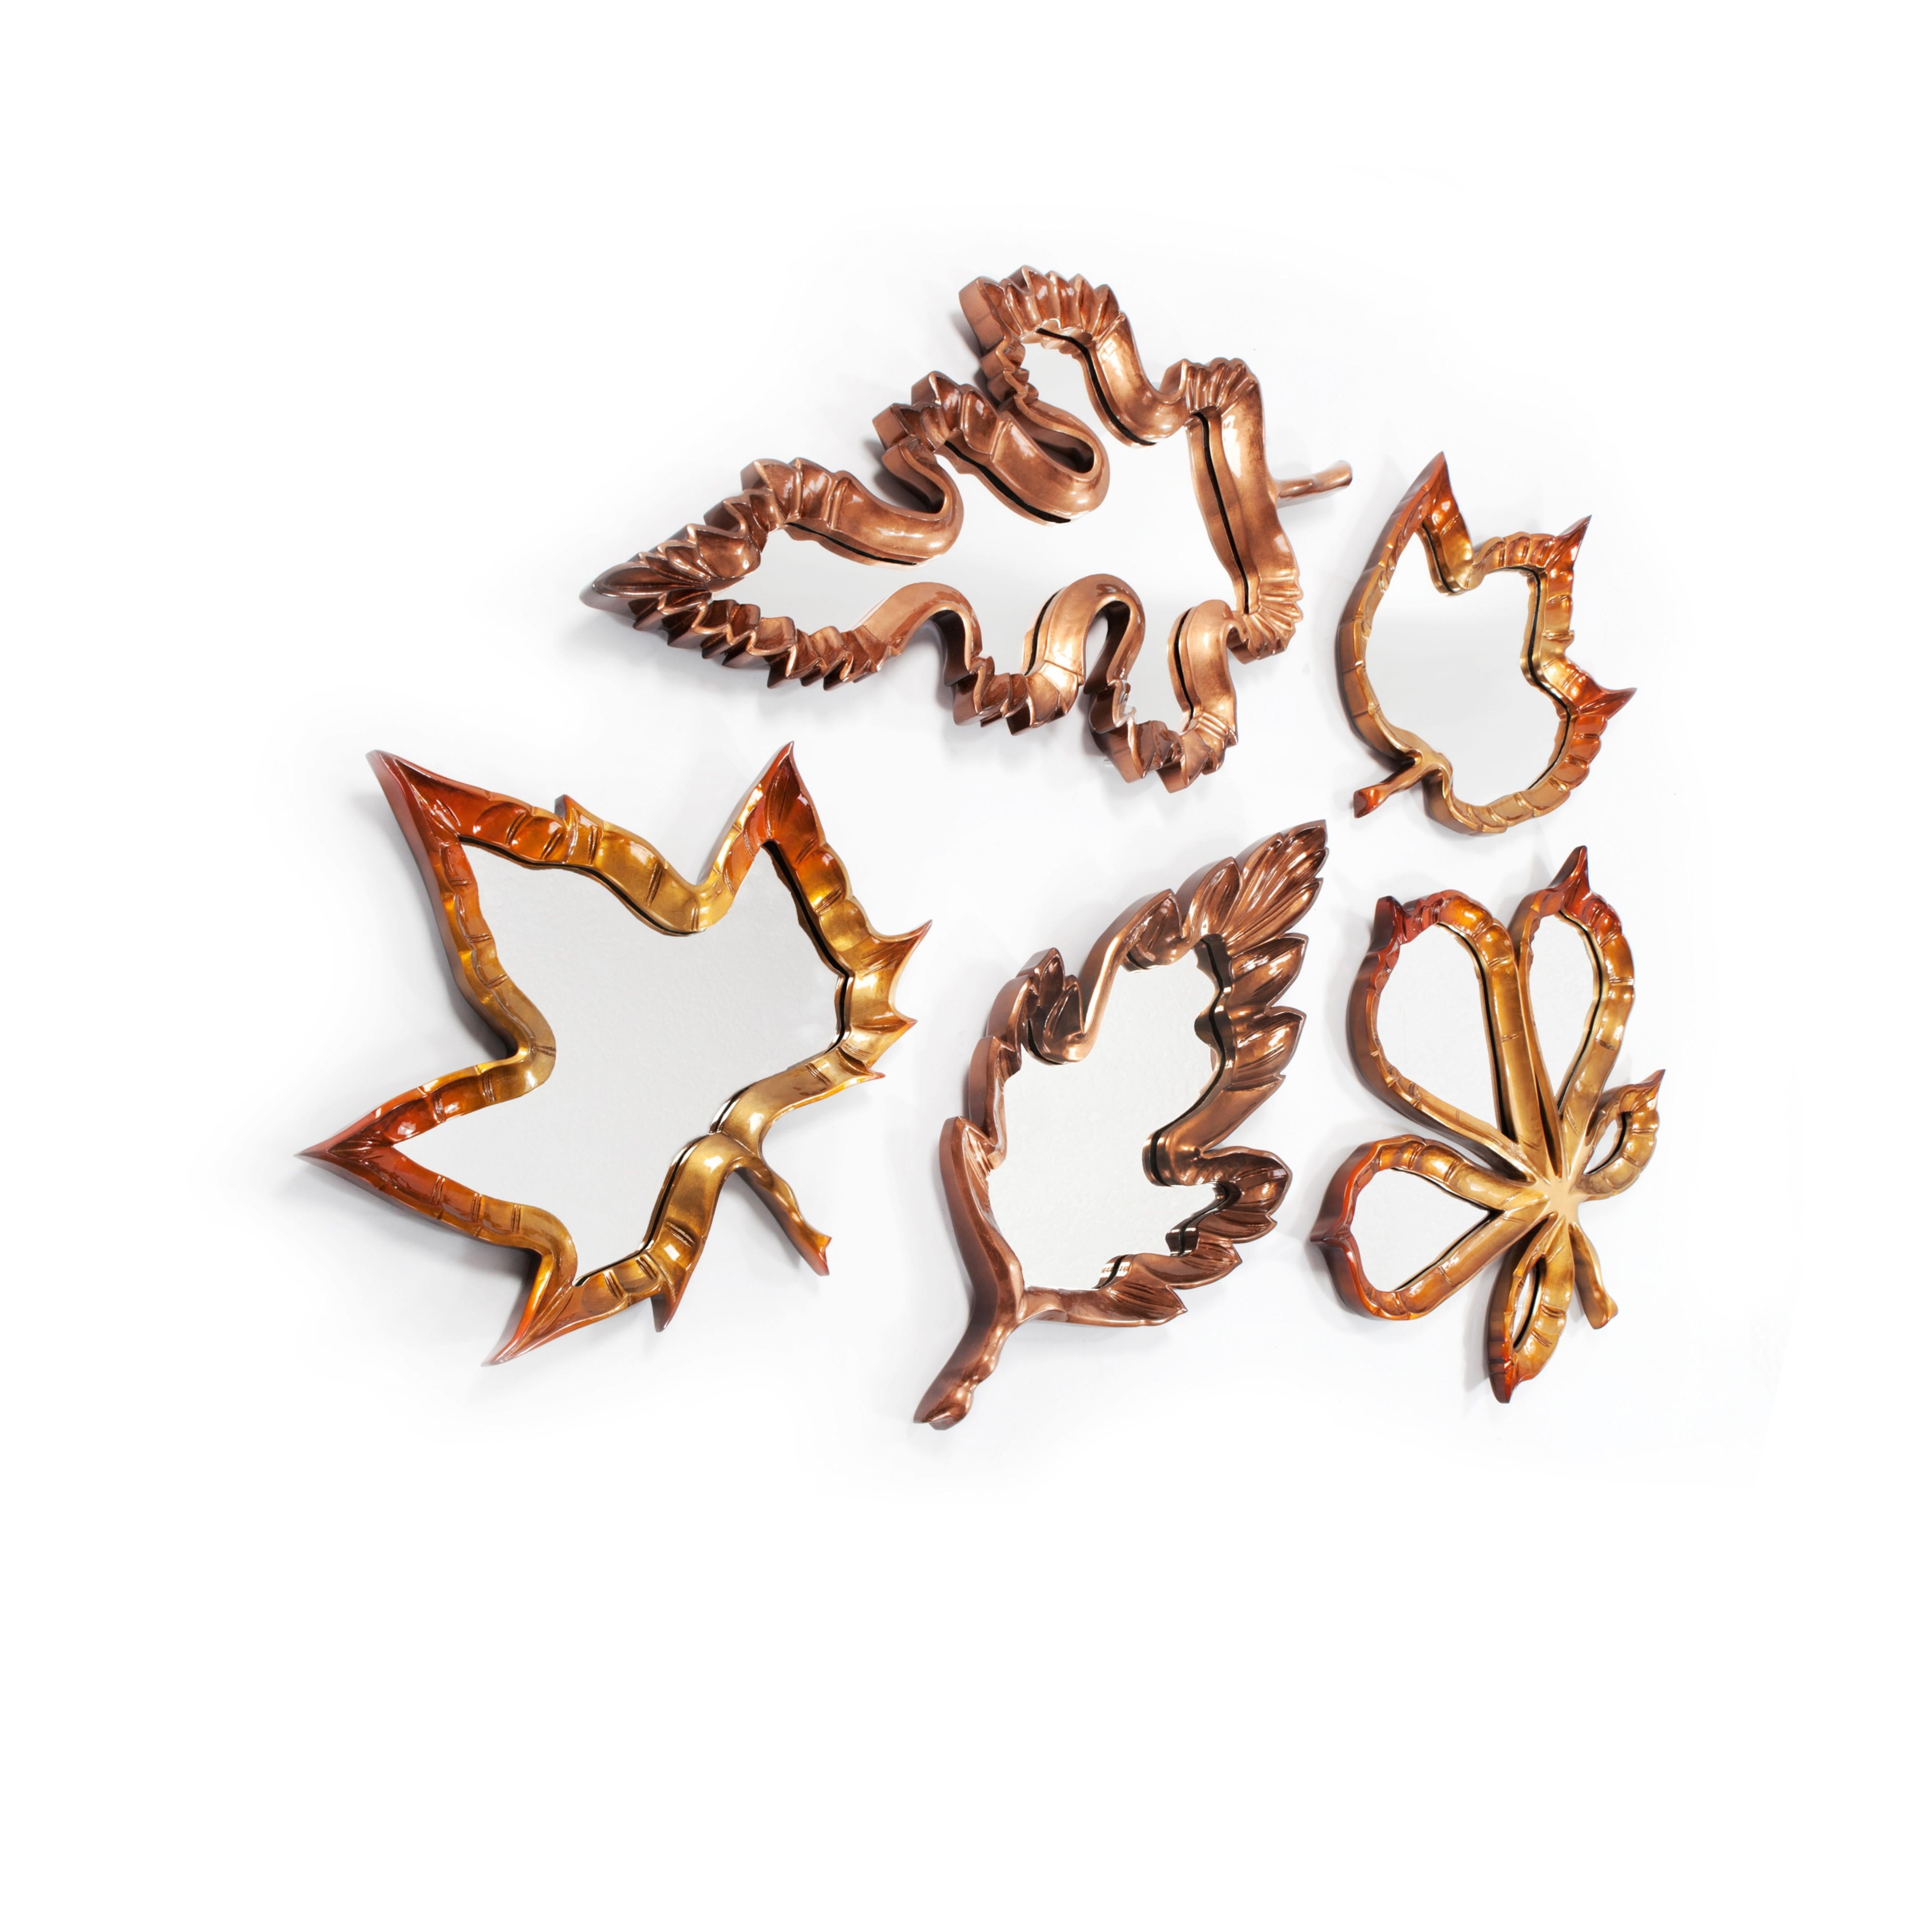 Entirely sculpted in wood, the Fallen Leaves mirrors recreate the natural hues and shapes of real leaves with aged broken tips.
The natural aging revealed by the broken tips of the leaves is created by the hand carved structure with the wisdom of